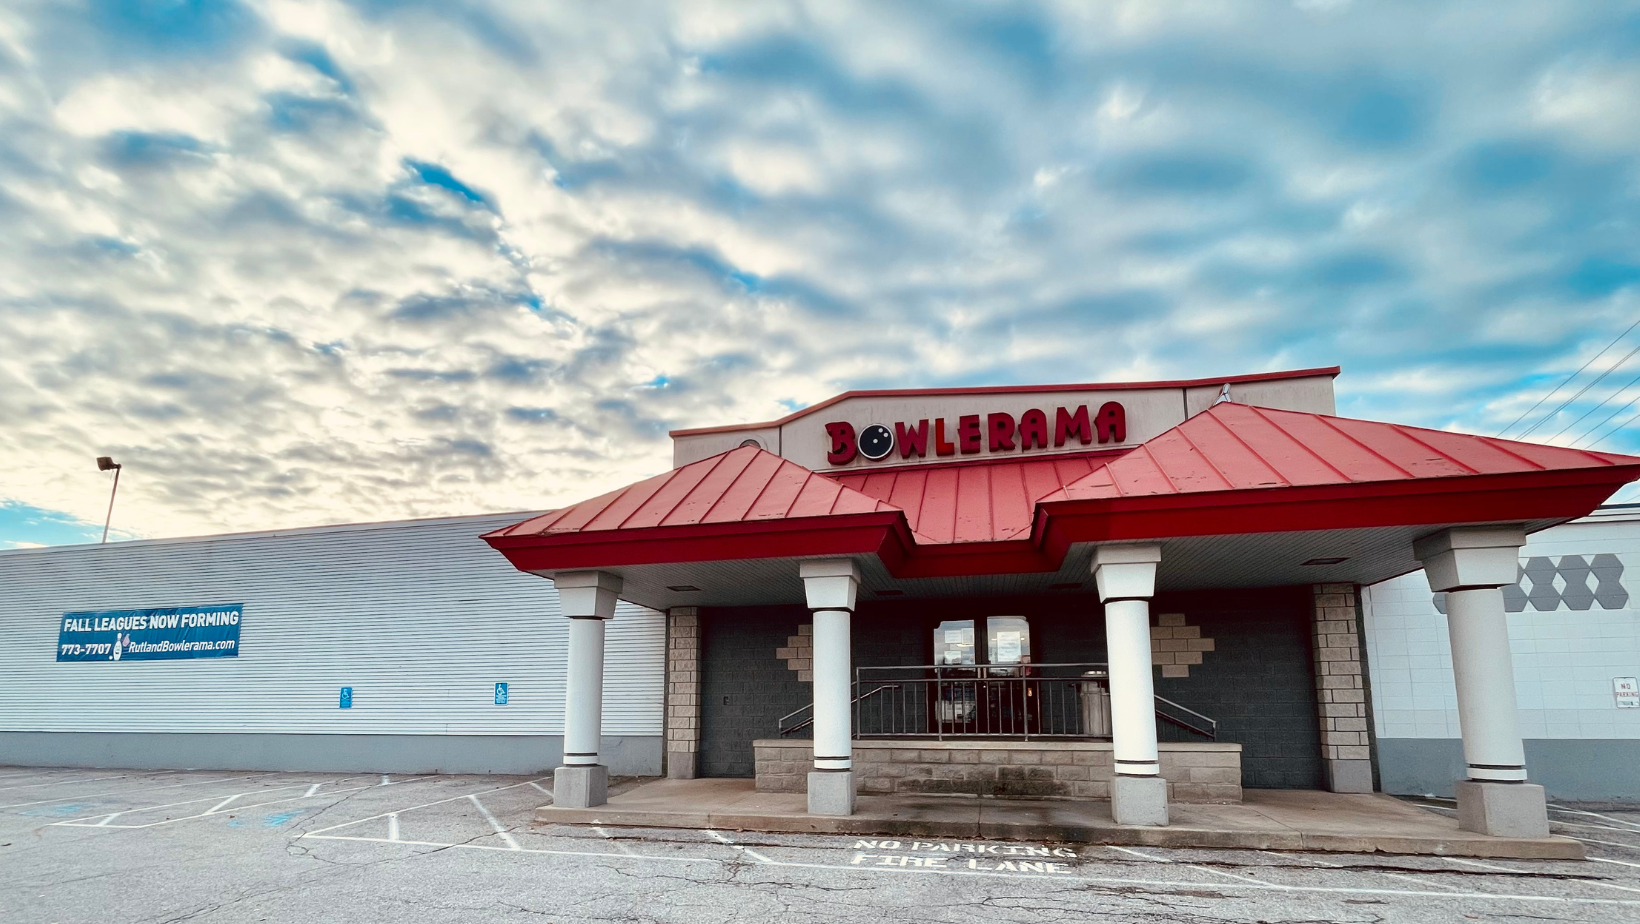 Rutland Bowlerama is the Ultimate in Family Entertainment